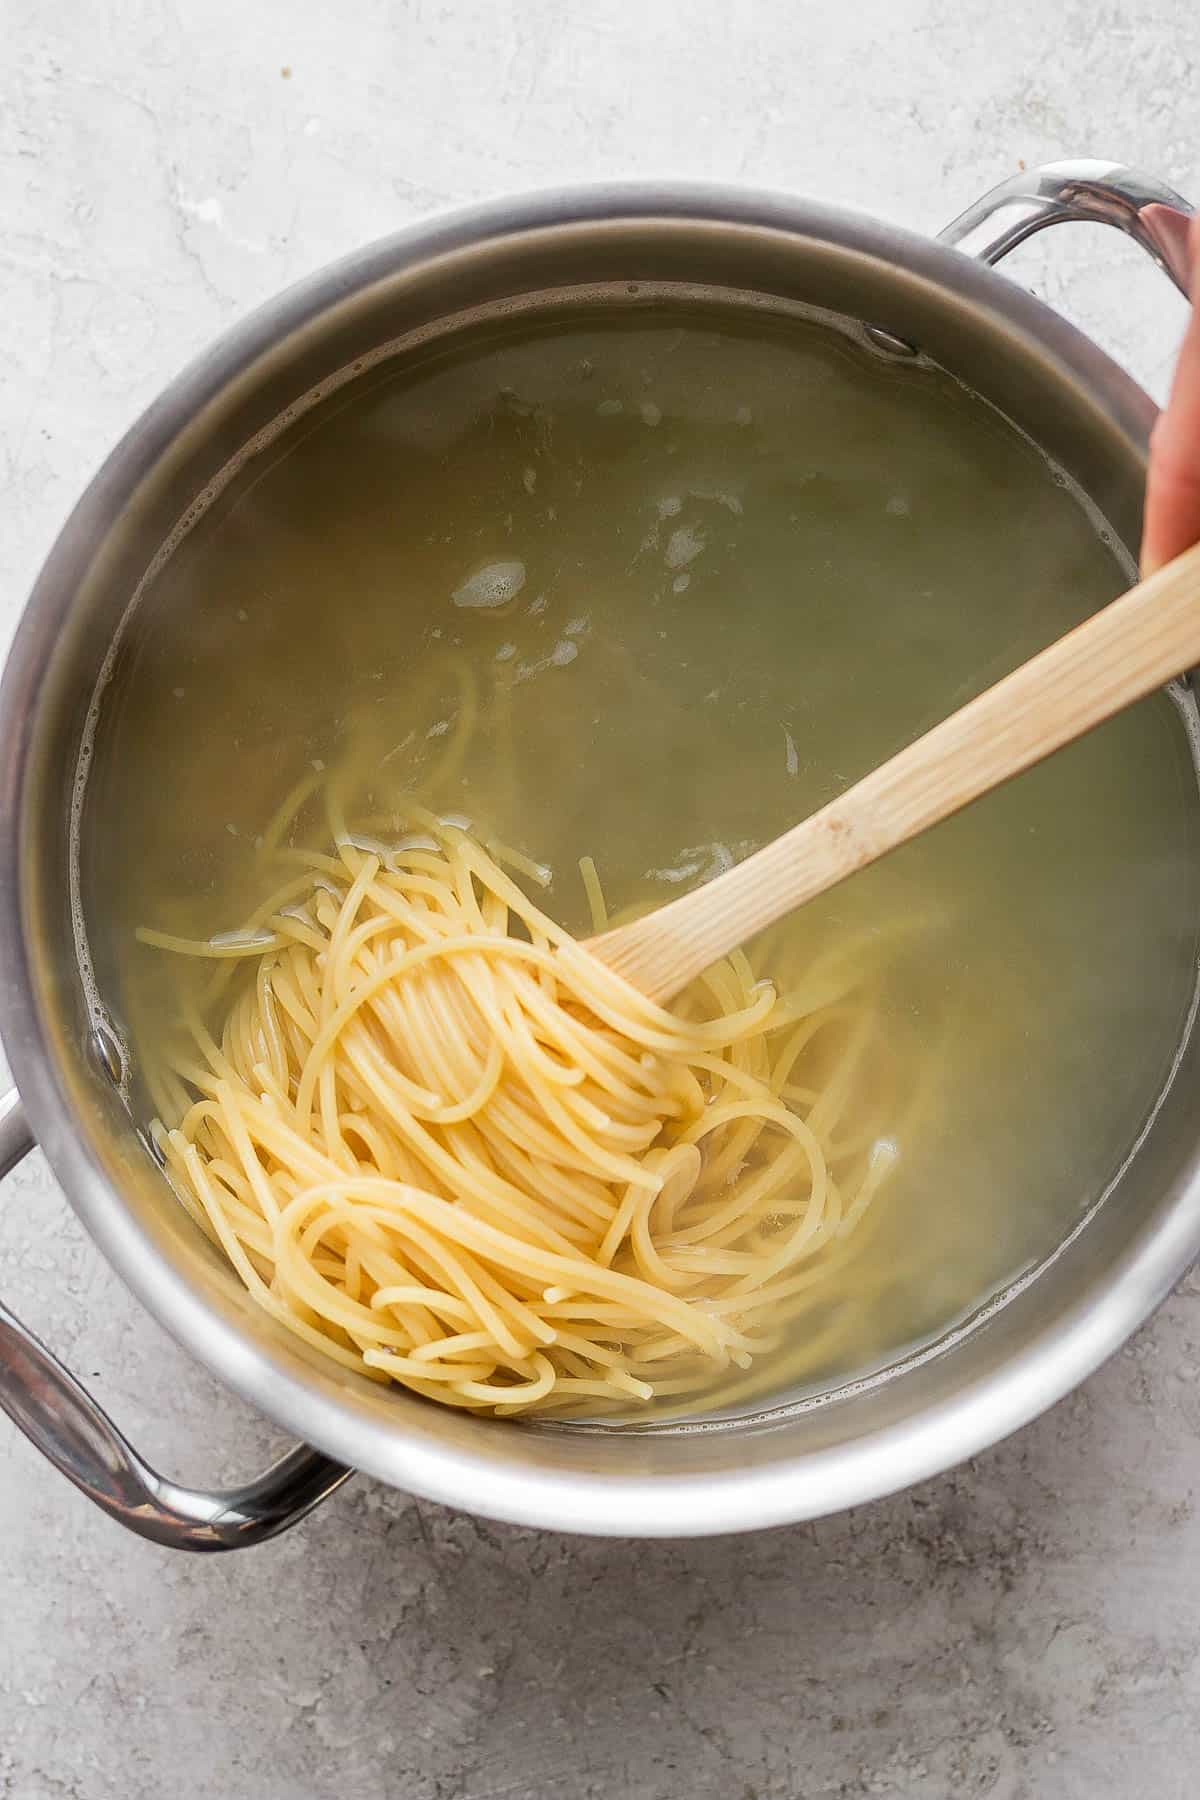 Spaghetti noodles cooking in a large pot and being pulled out with a wooden spoon.